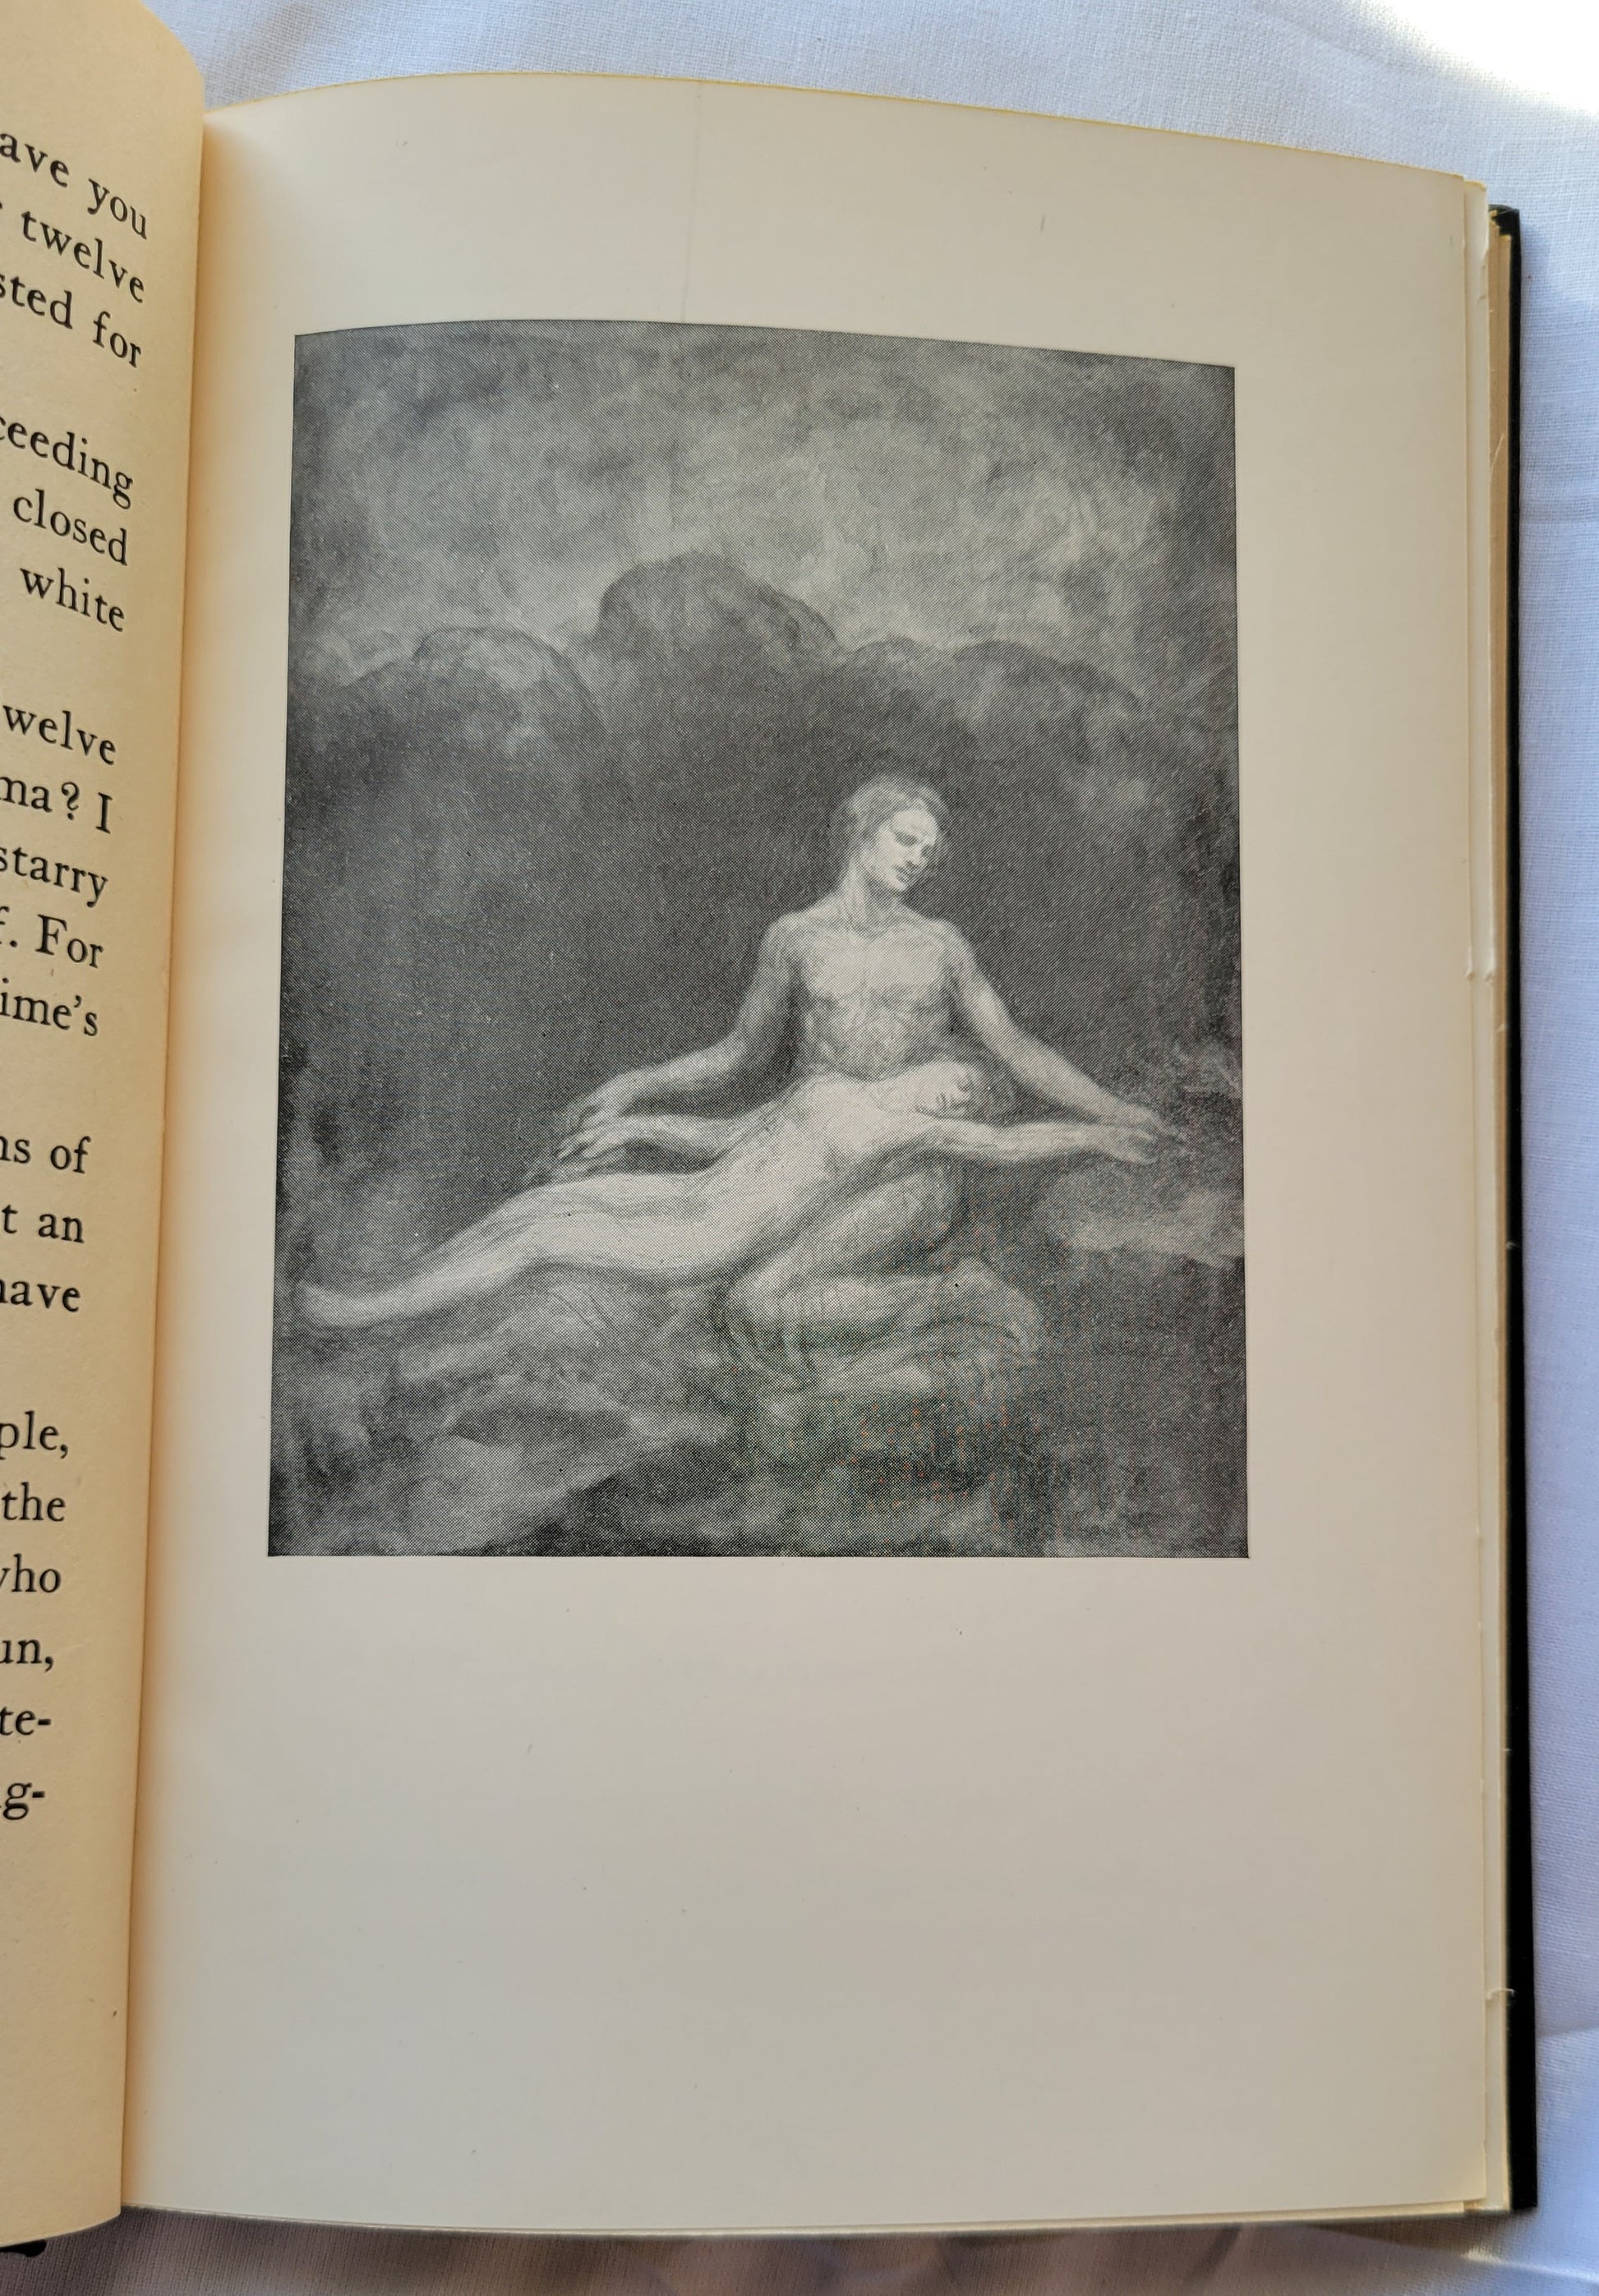 Vintage book for sale “The Garden of the Prophet” by Kahlil Gibran, published by Alfred A. Knoff. Illustration